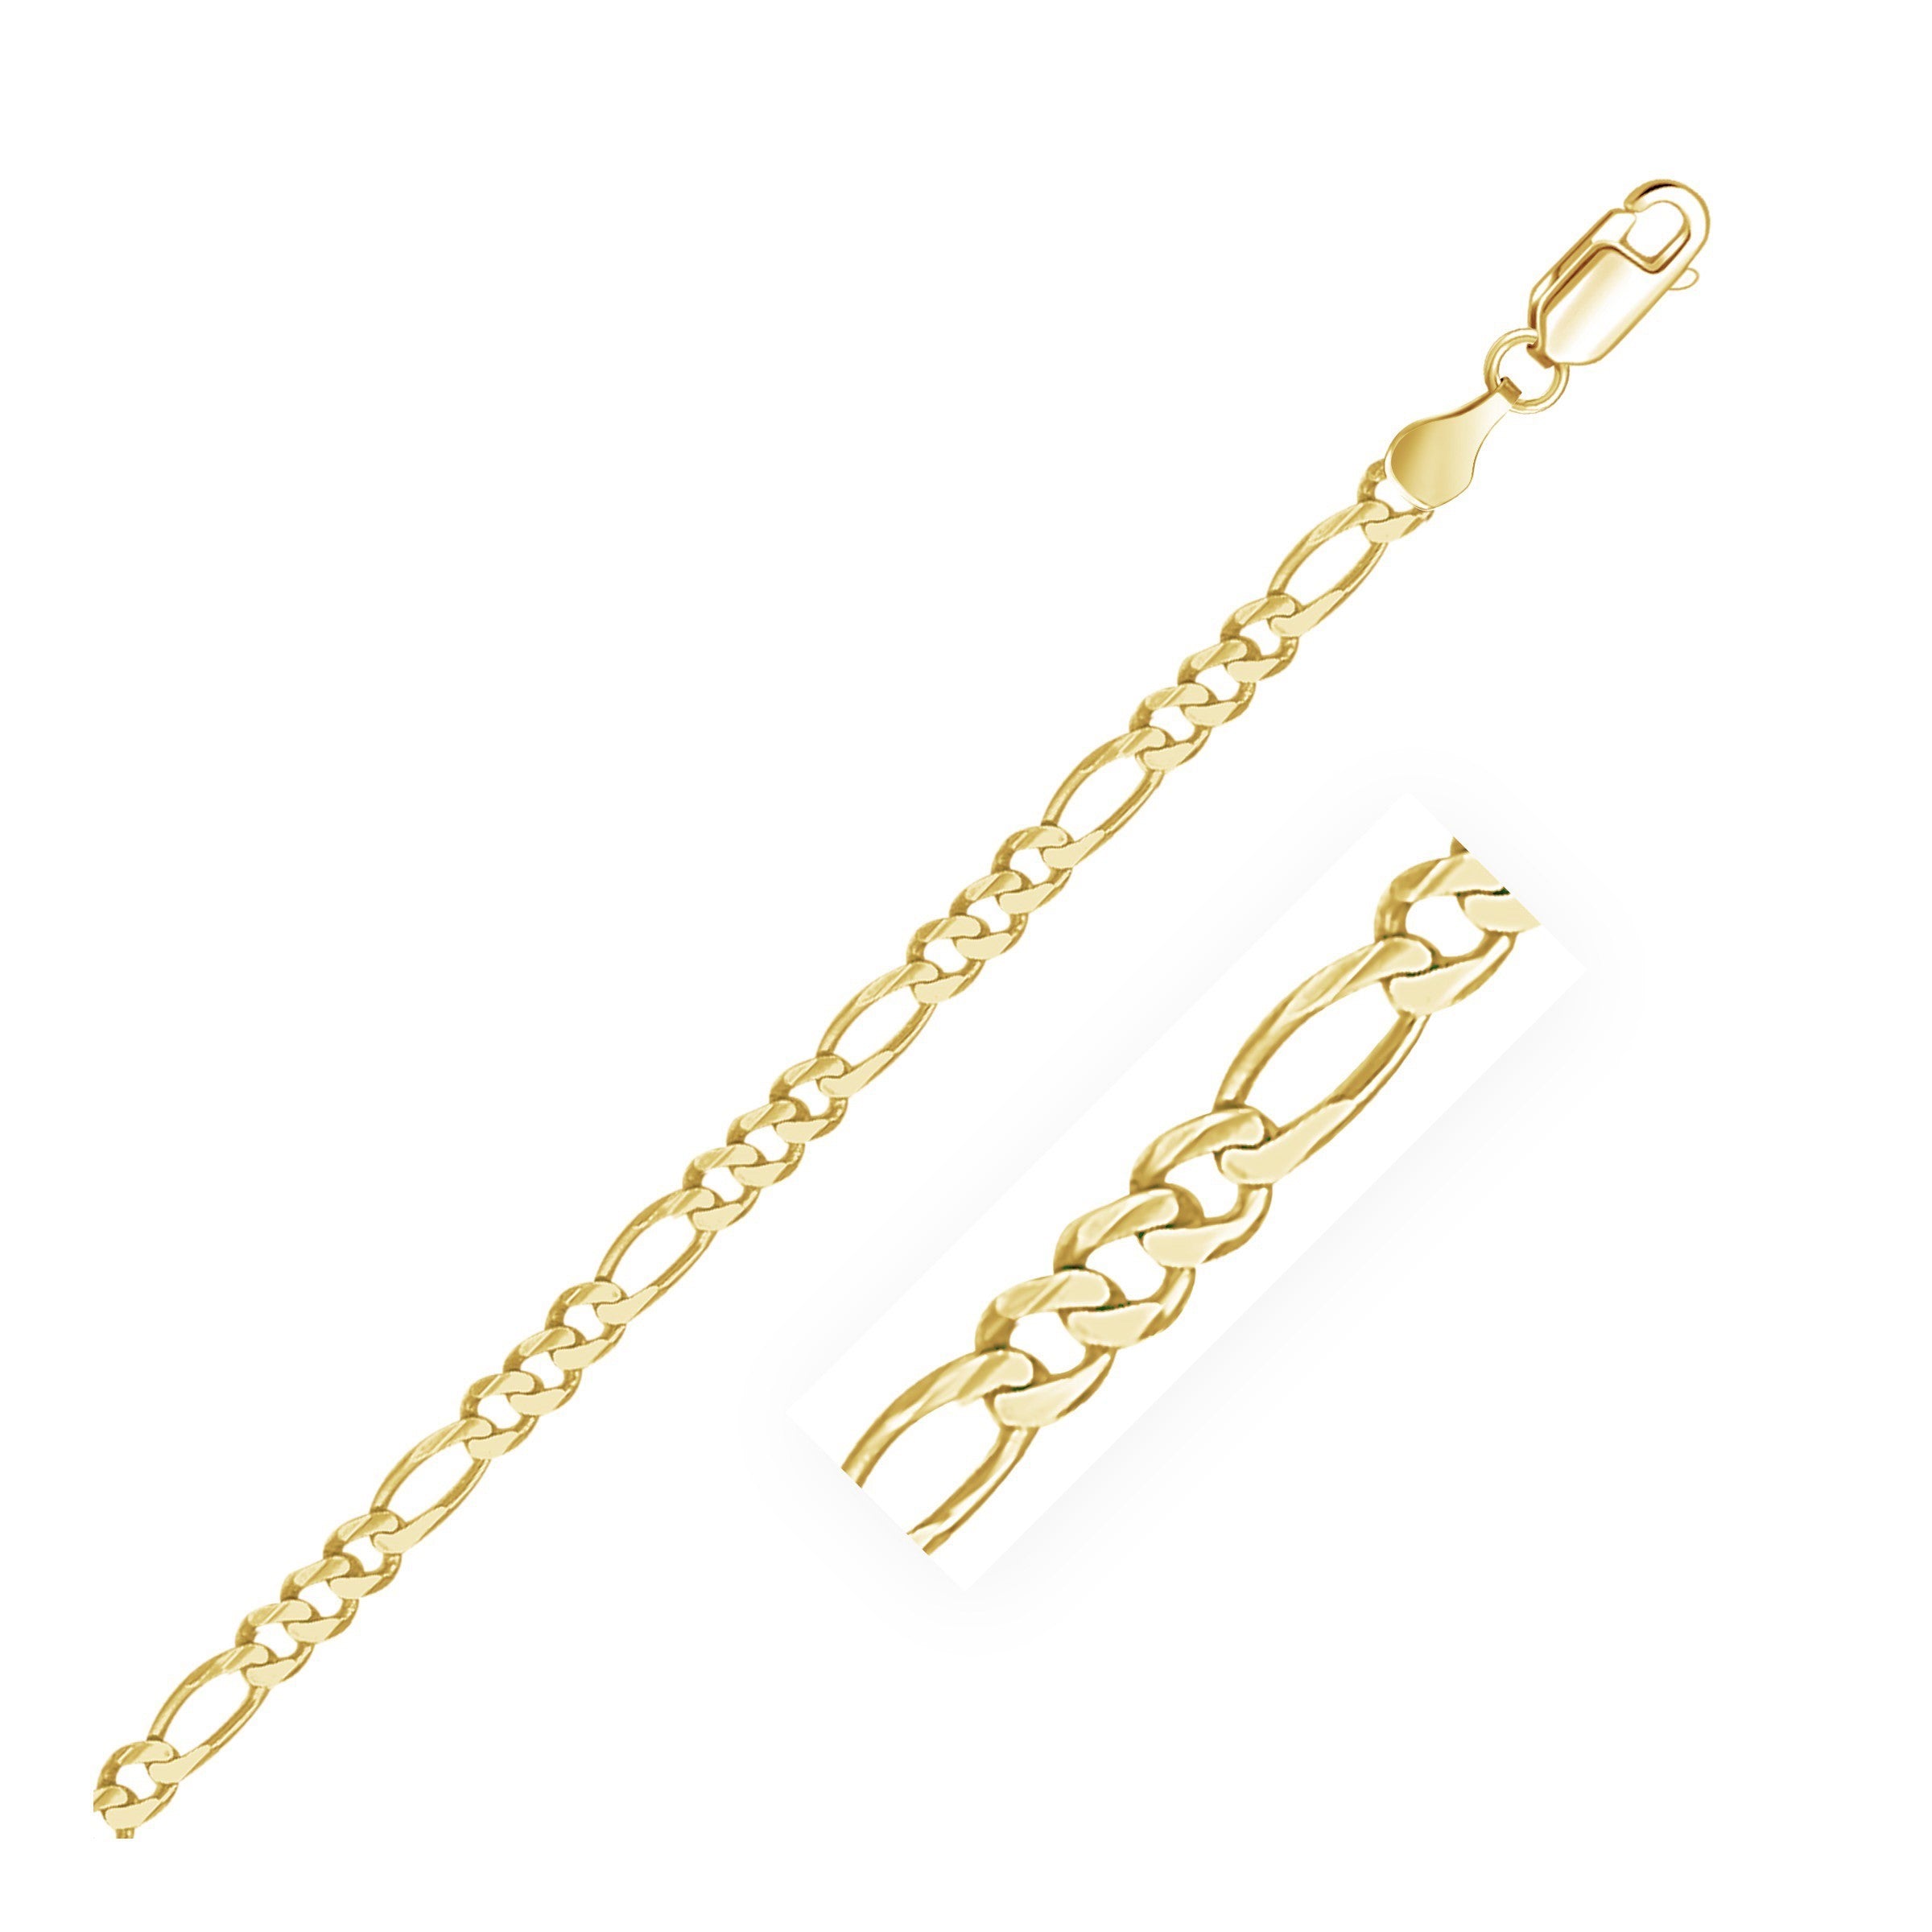 10K Yellow Gold Solid Figaro Chain 3 70 Mm 25044-1